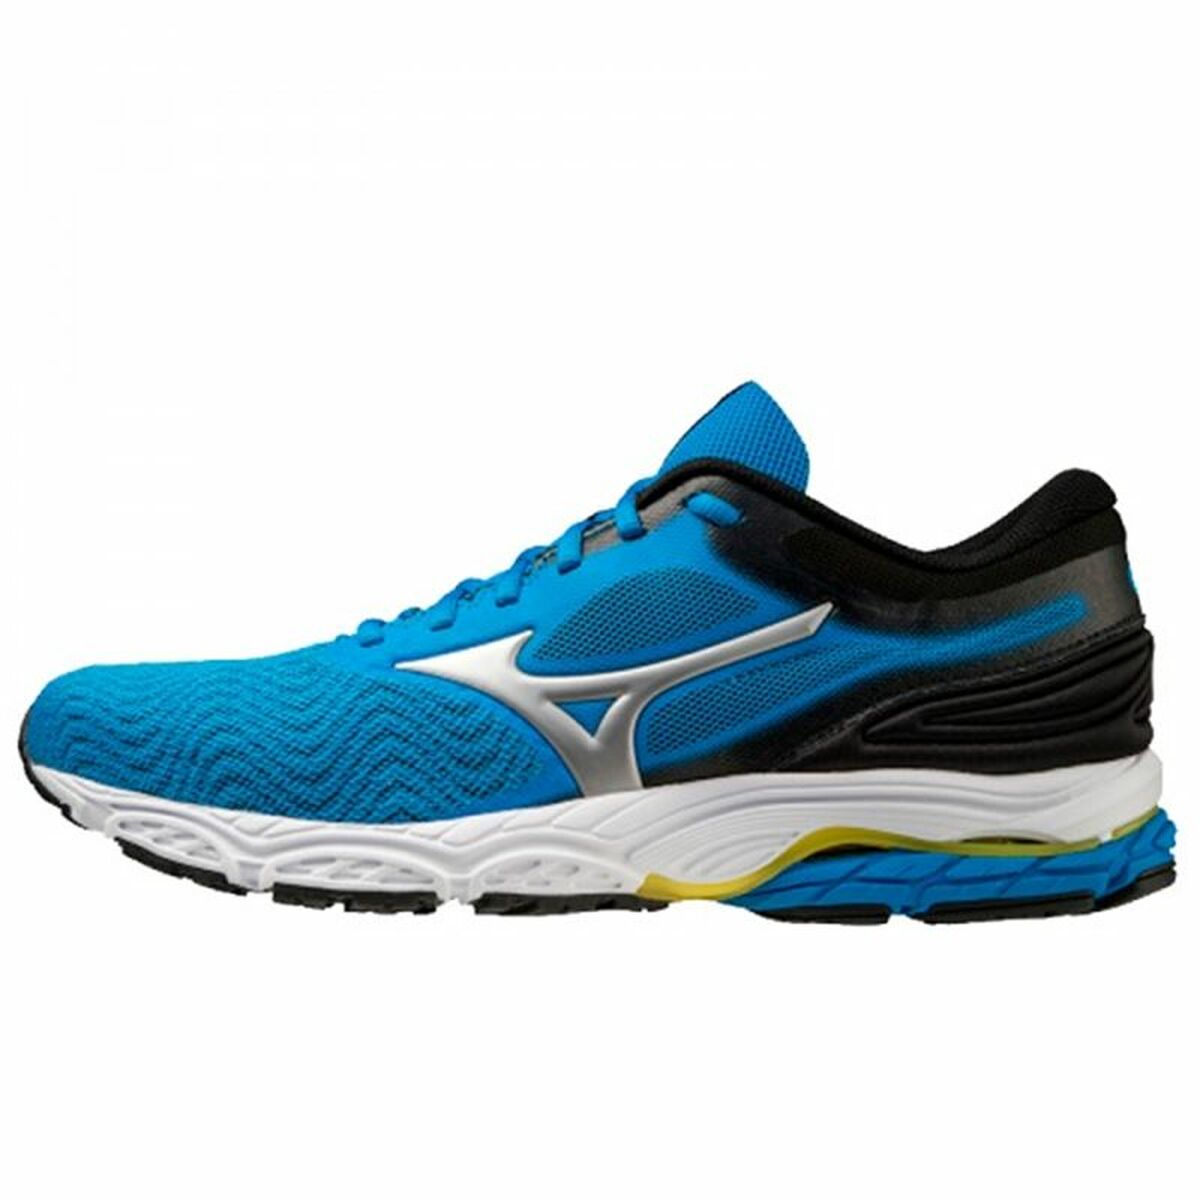 Running Shoes for Adults Mizuno Wave Prodigy 4 Blue Men